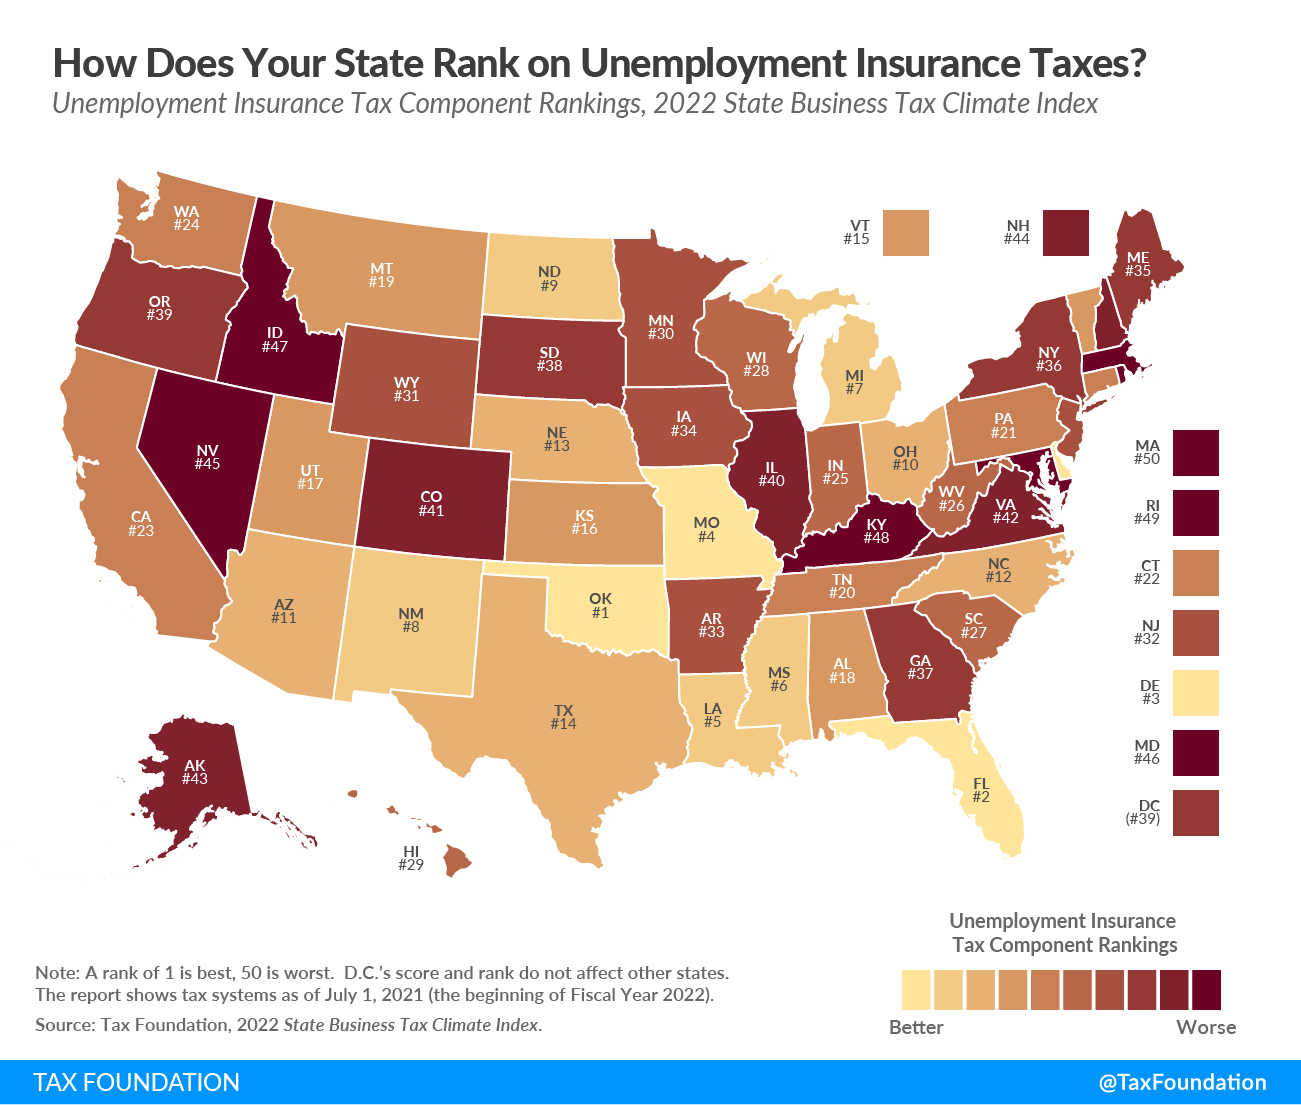 Ranking Unemployment Insurance Taxes on Our 2022 State Business Tax Climate Index How Does Your State Rank on Unemployment Insurance Taxes?